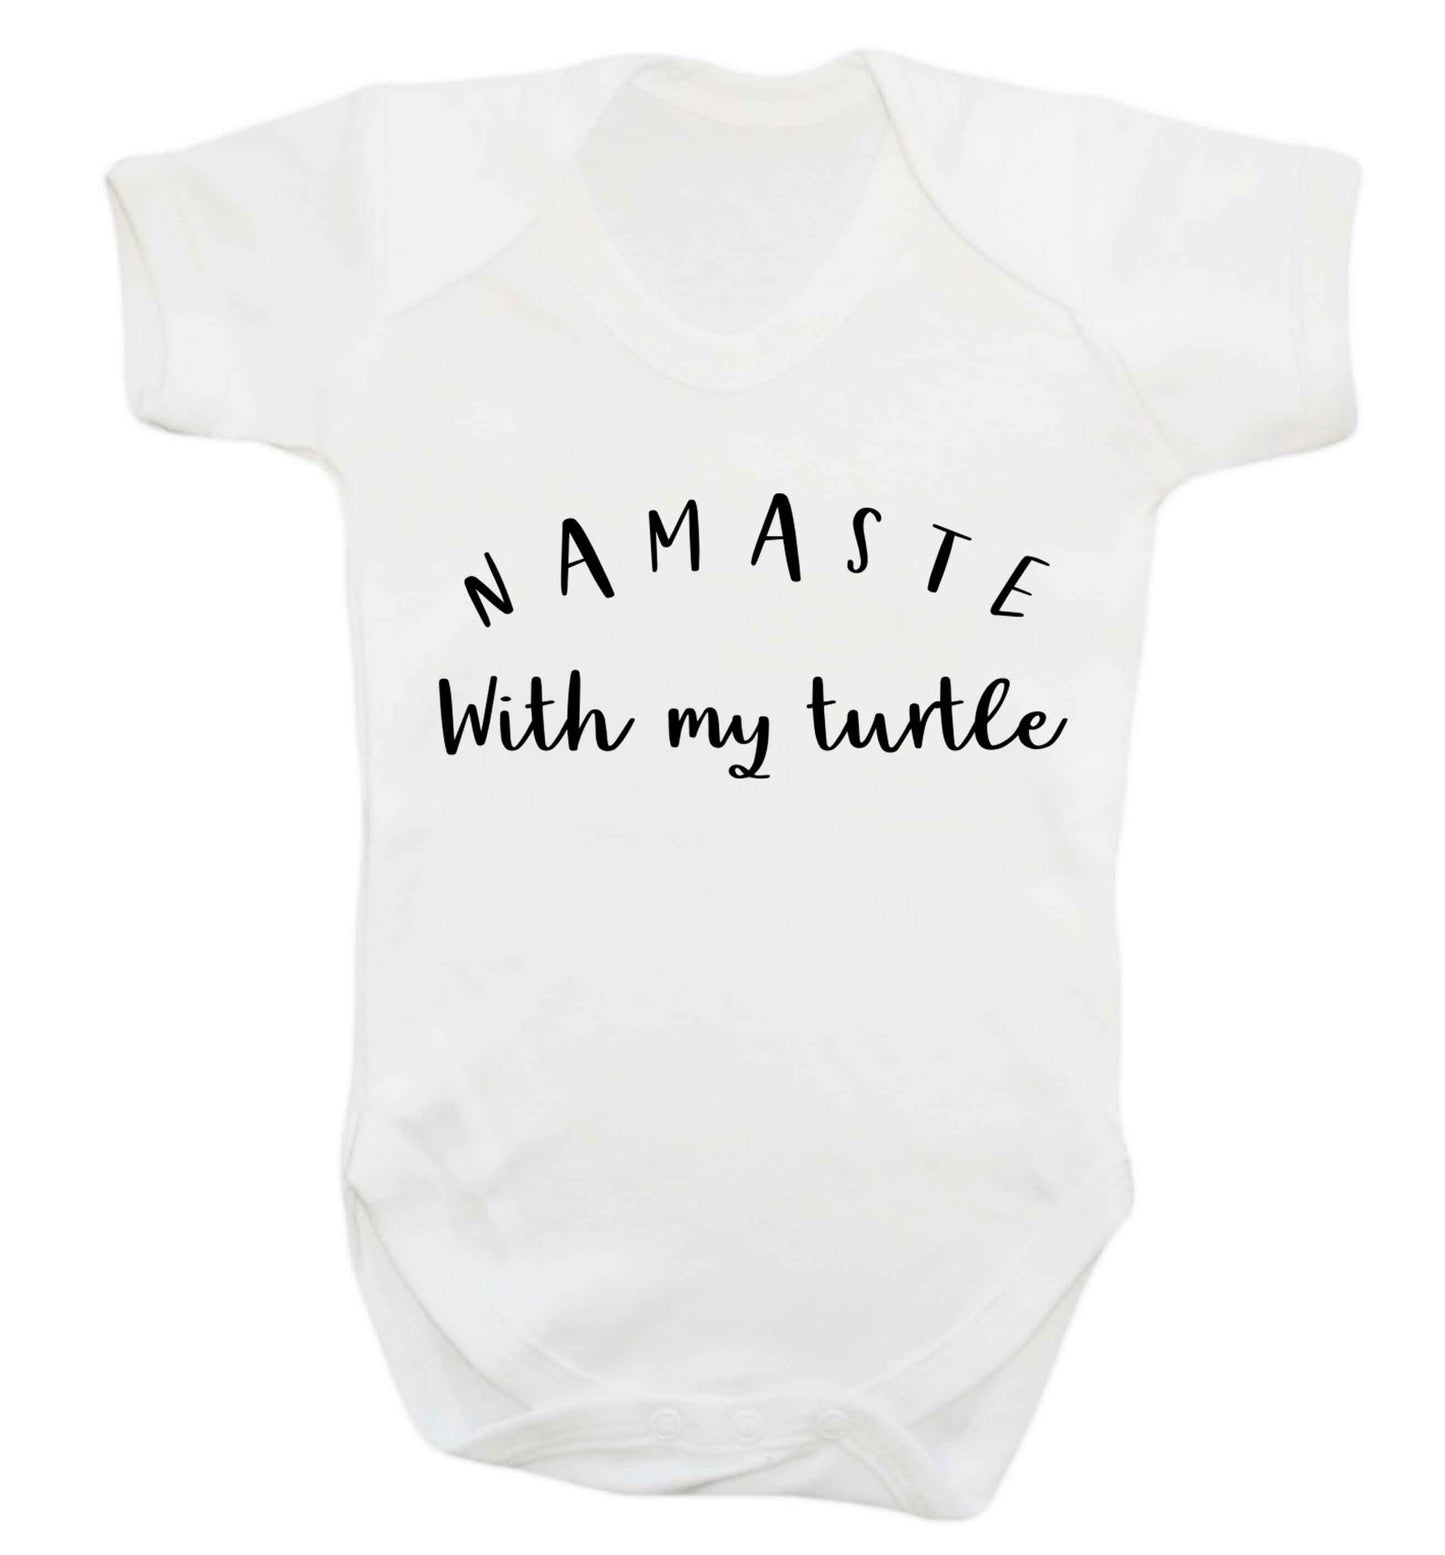 Namaste with my turtle Baby Vest white 18-24 months